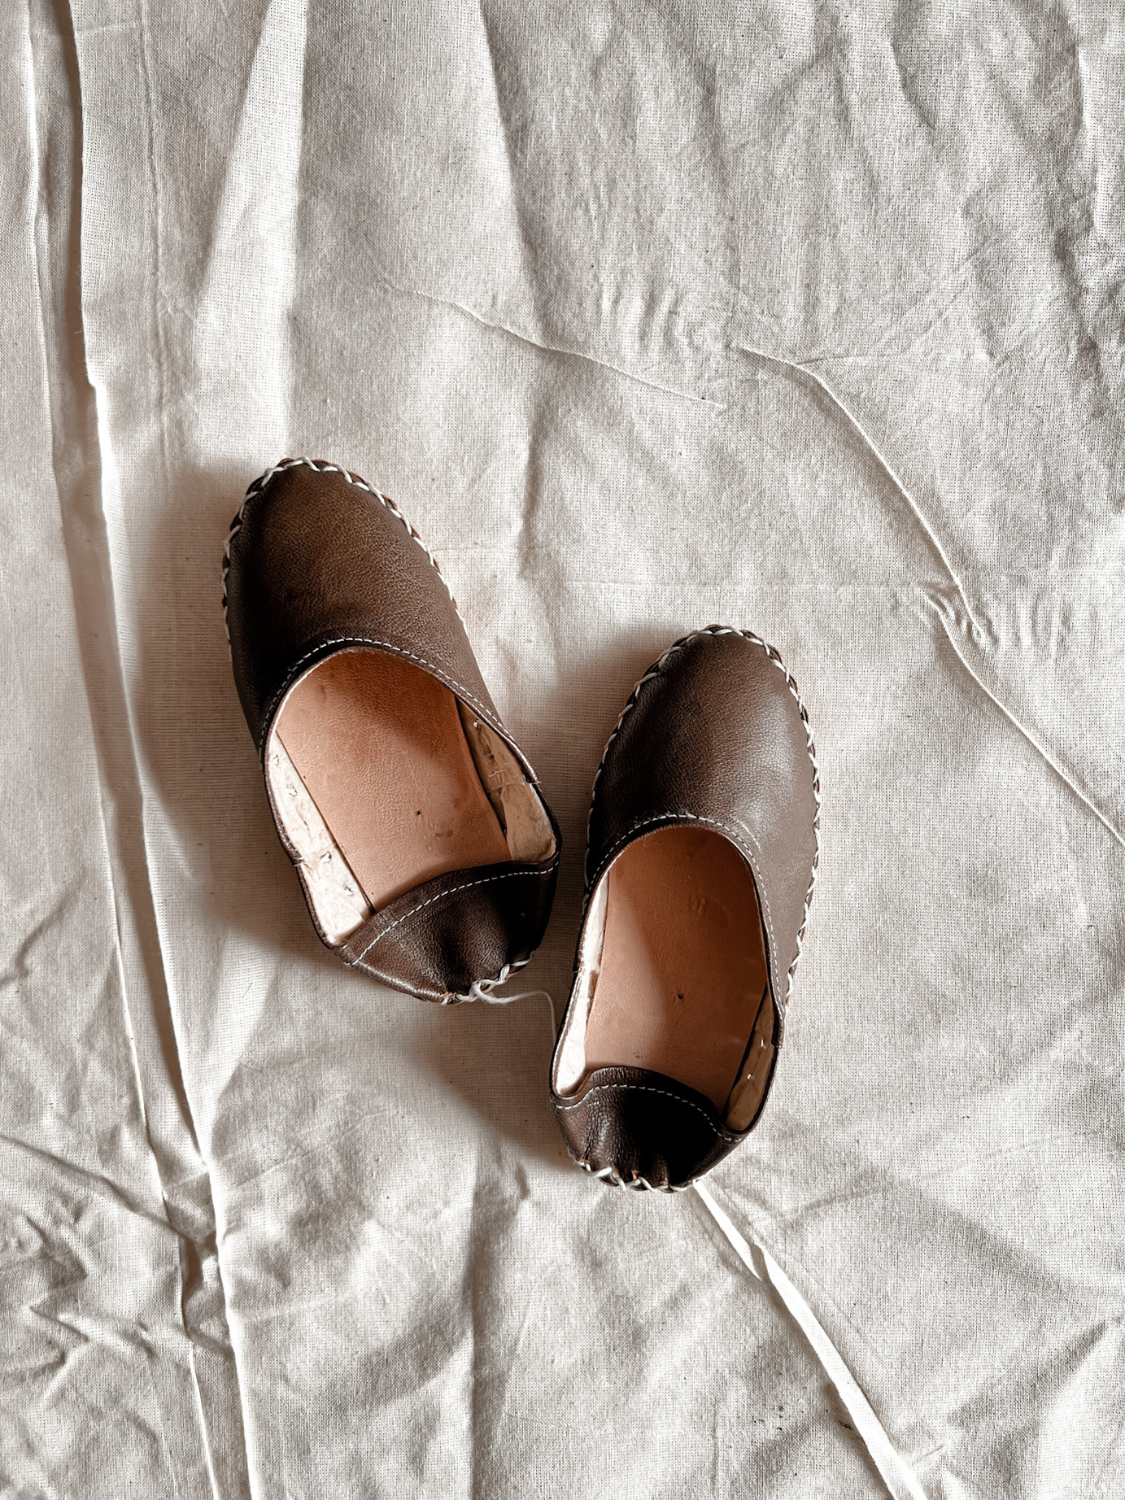 Kids Hand-Sewn Imported Egyptian Leather Shoes